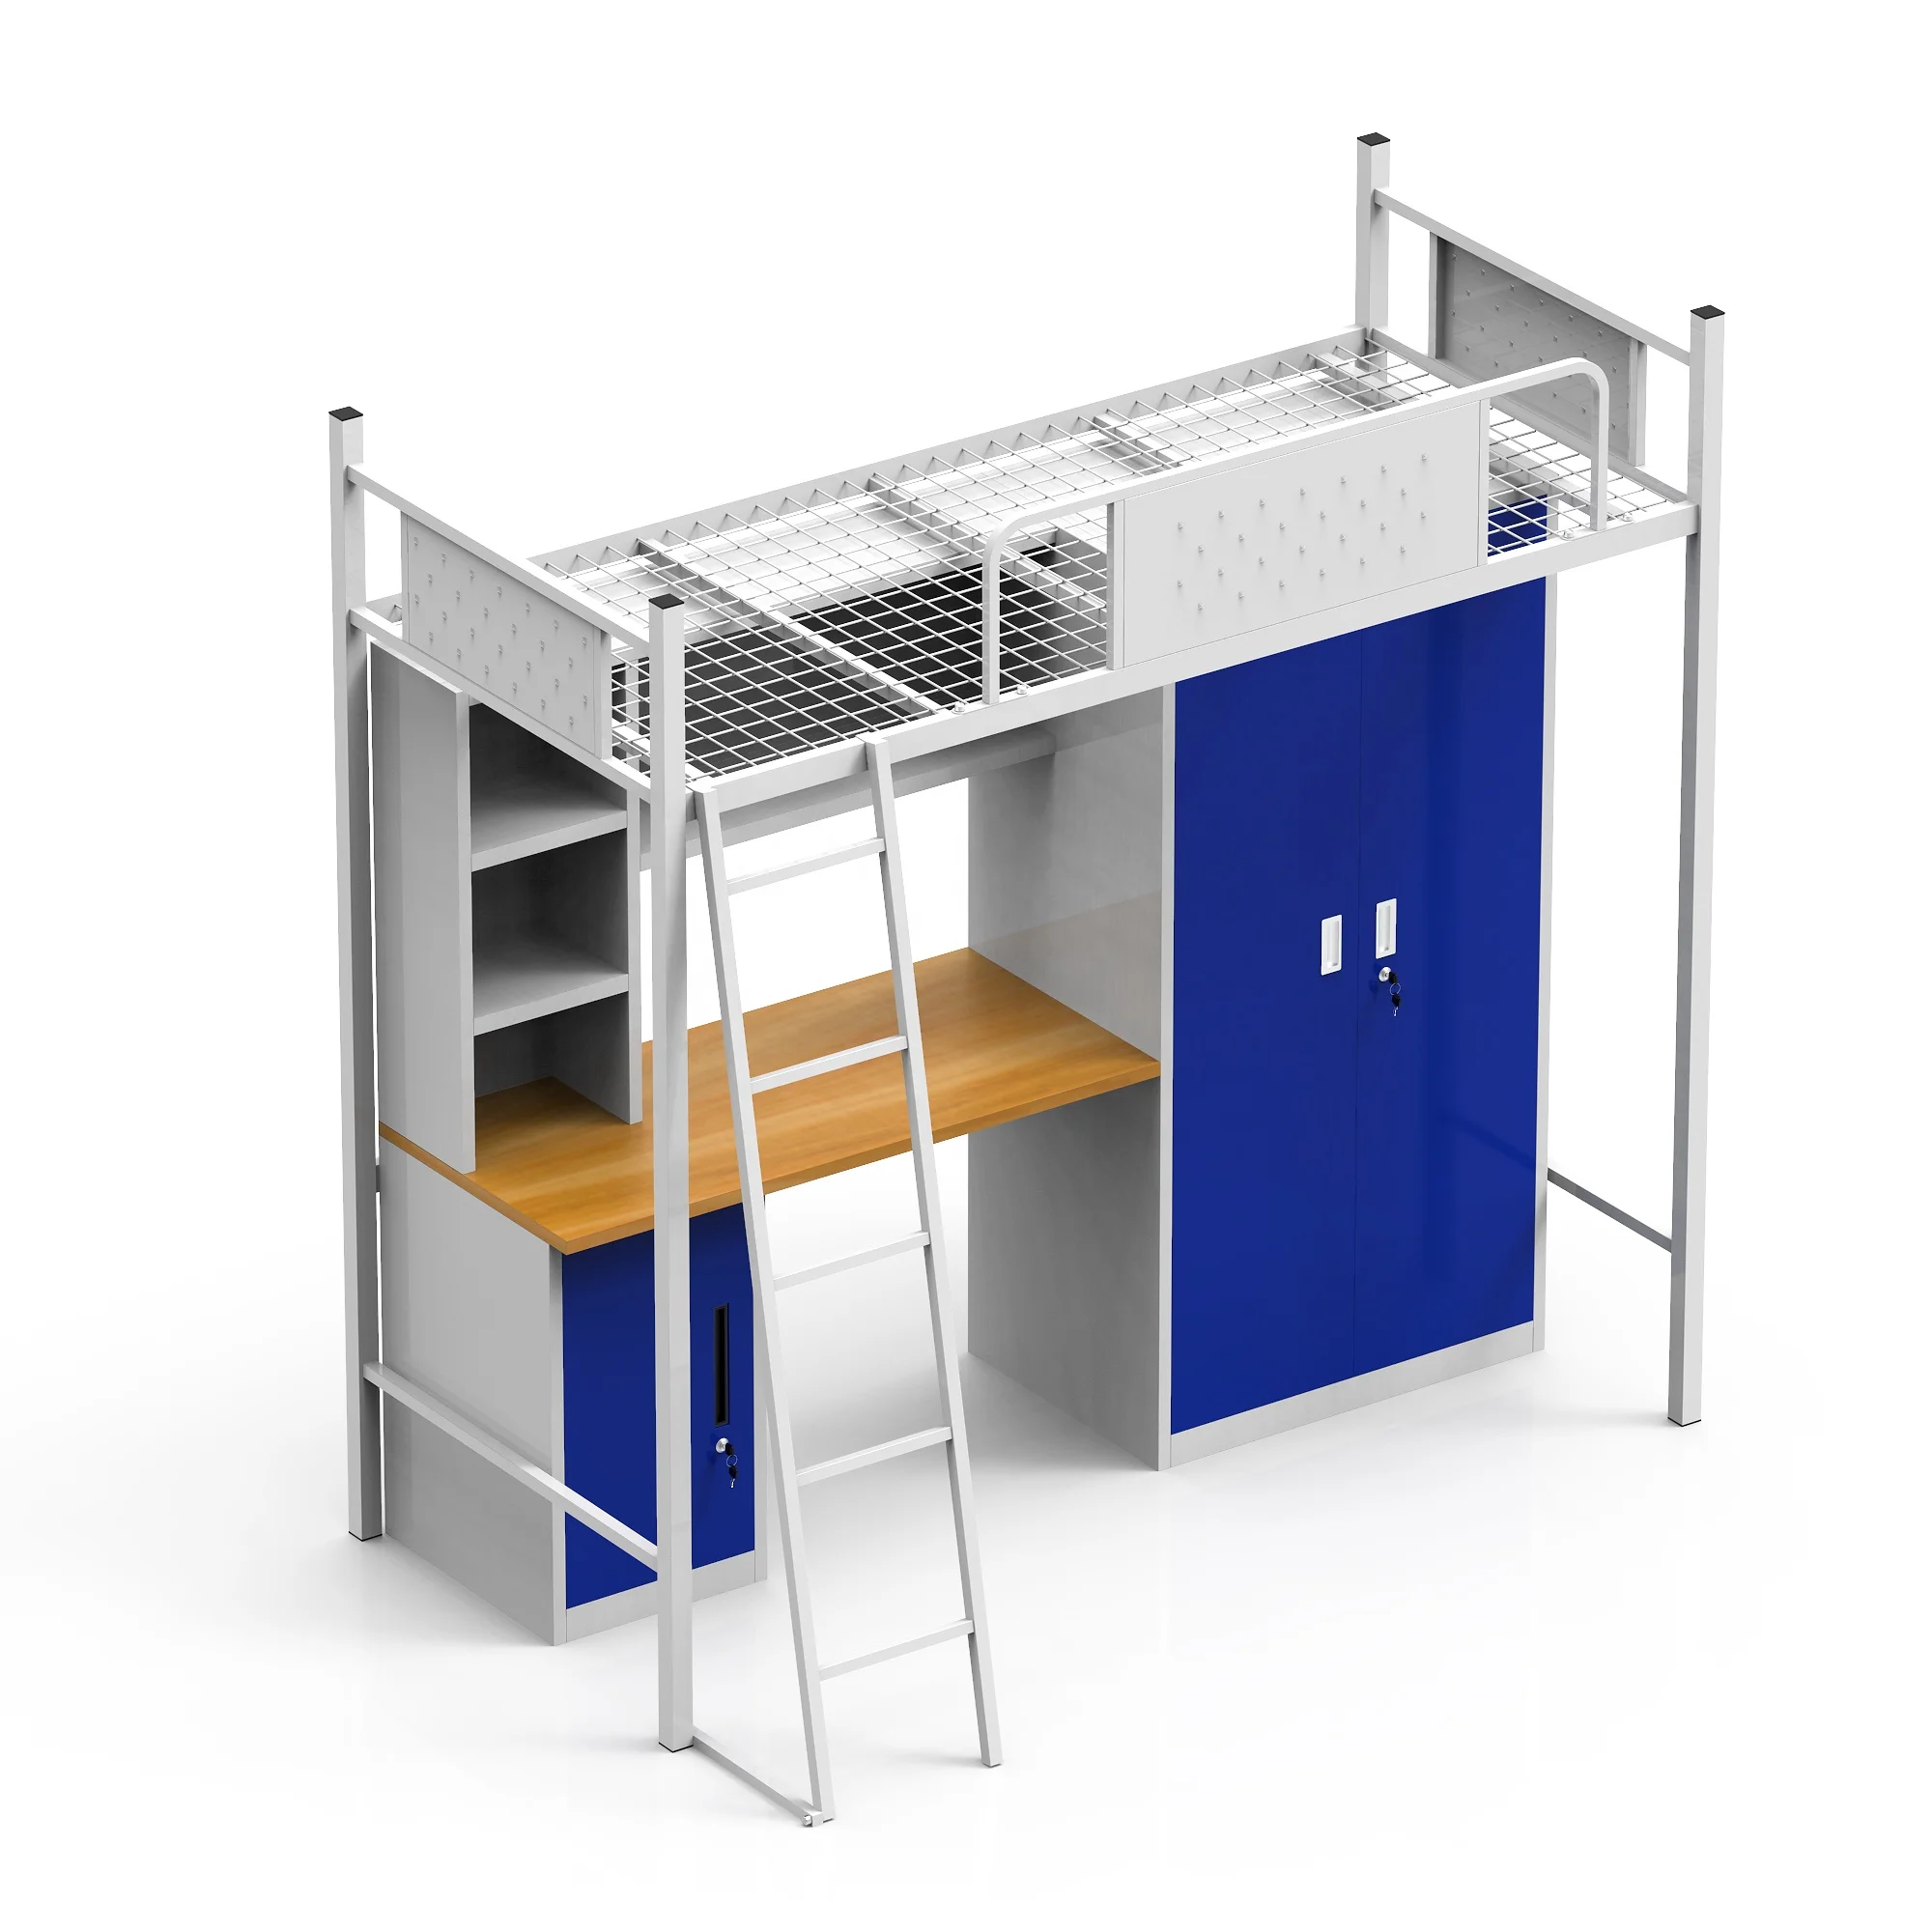 
high quality cheap university college metal steel dormitory bunk bed with desk  (60232369319)